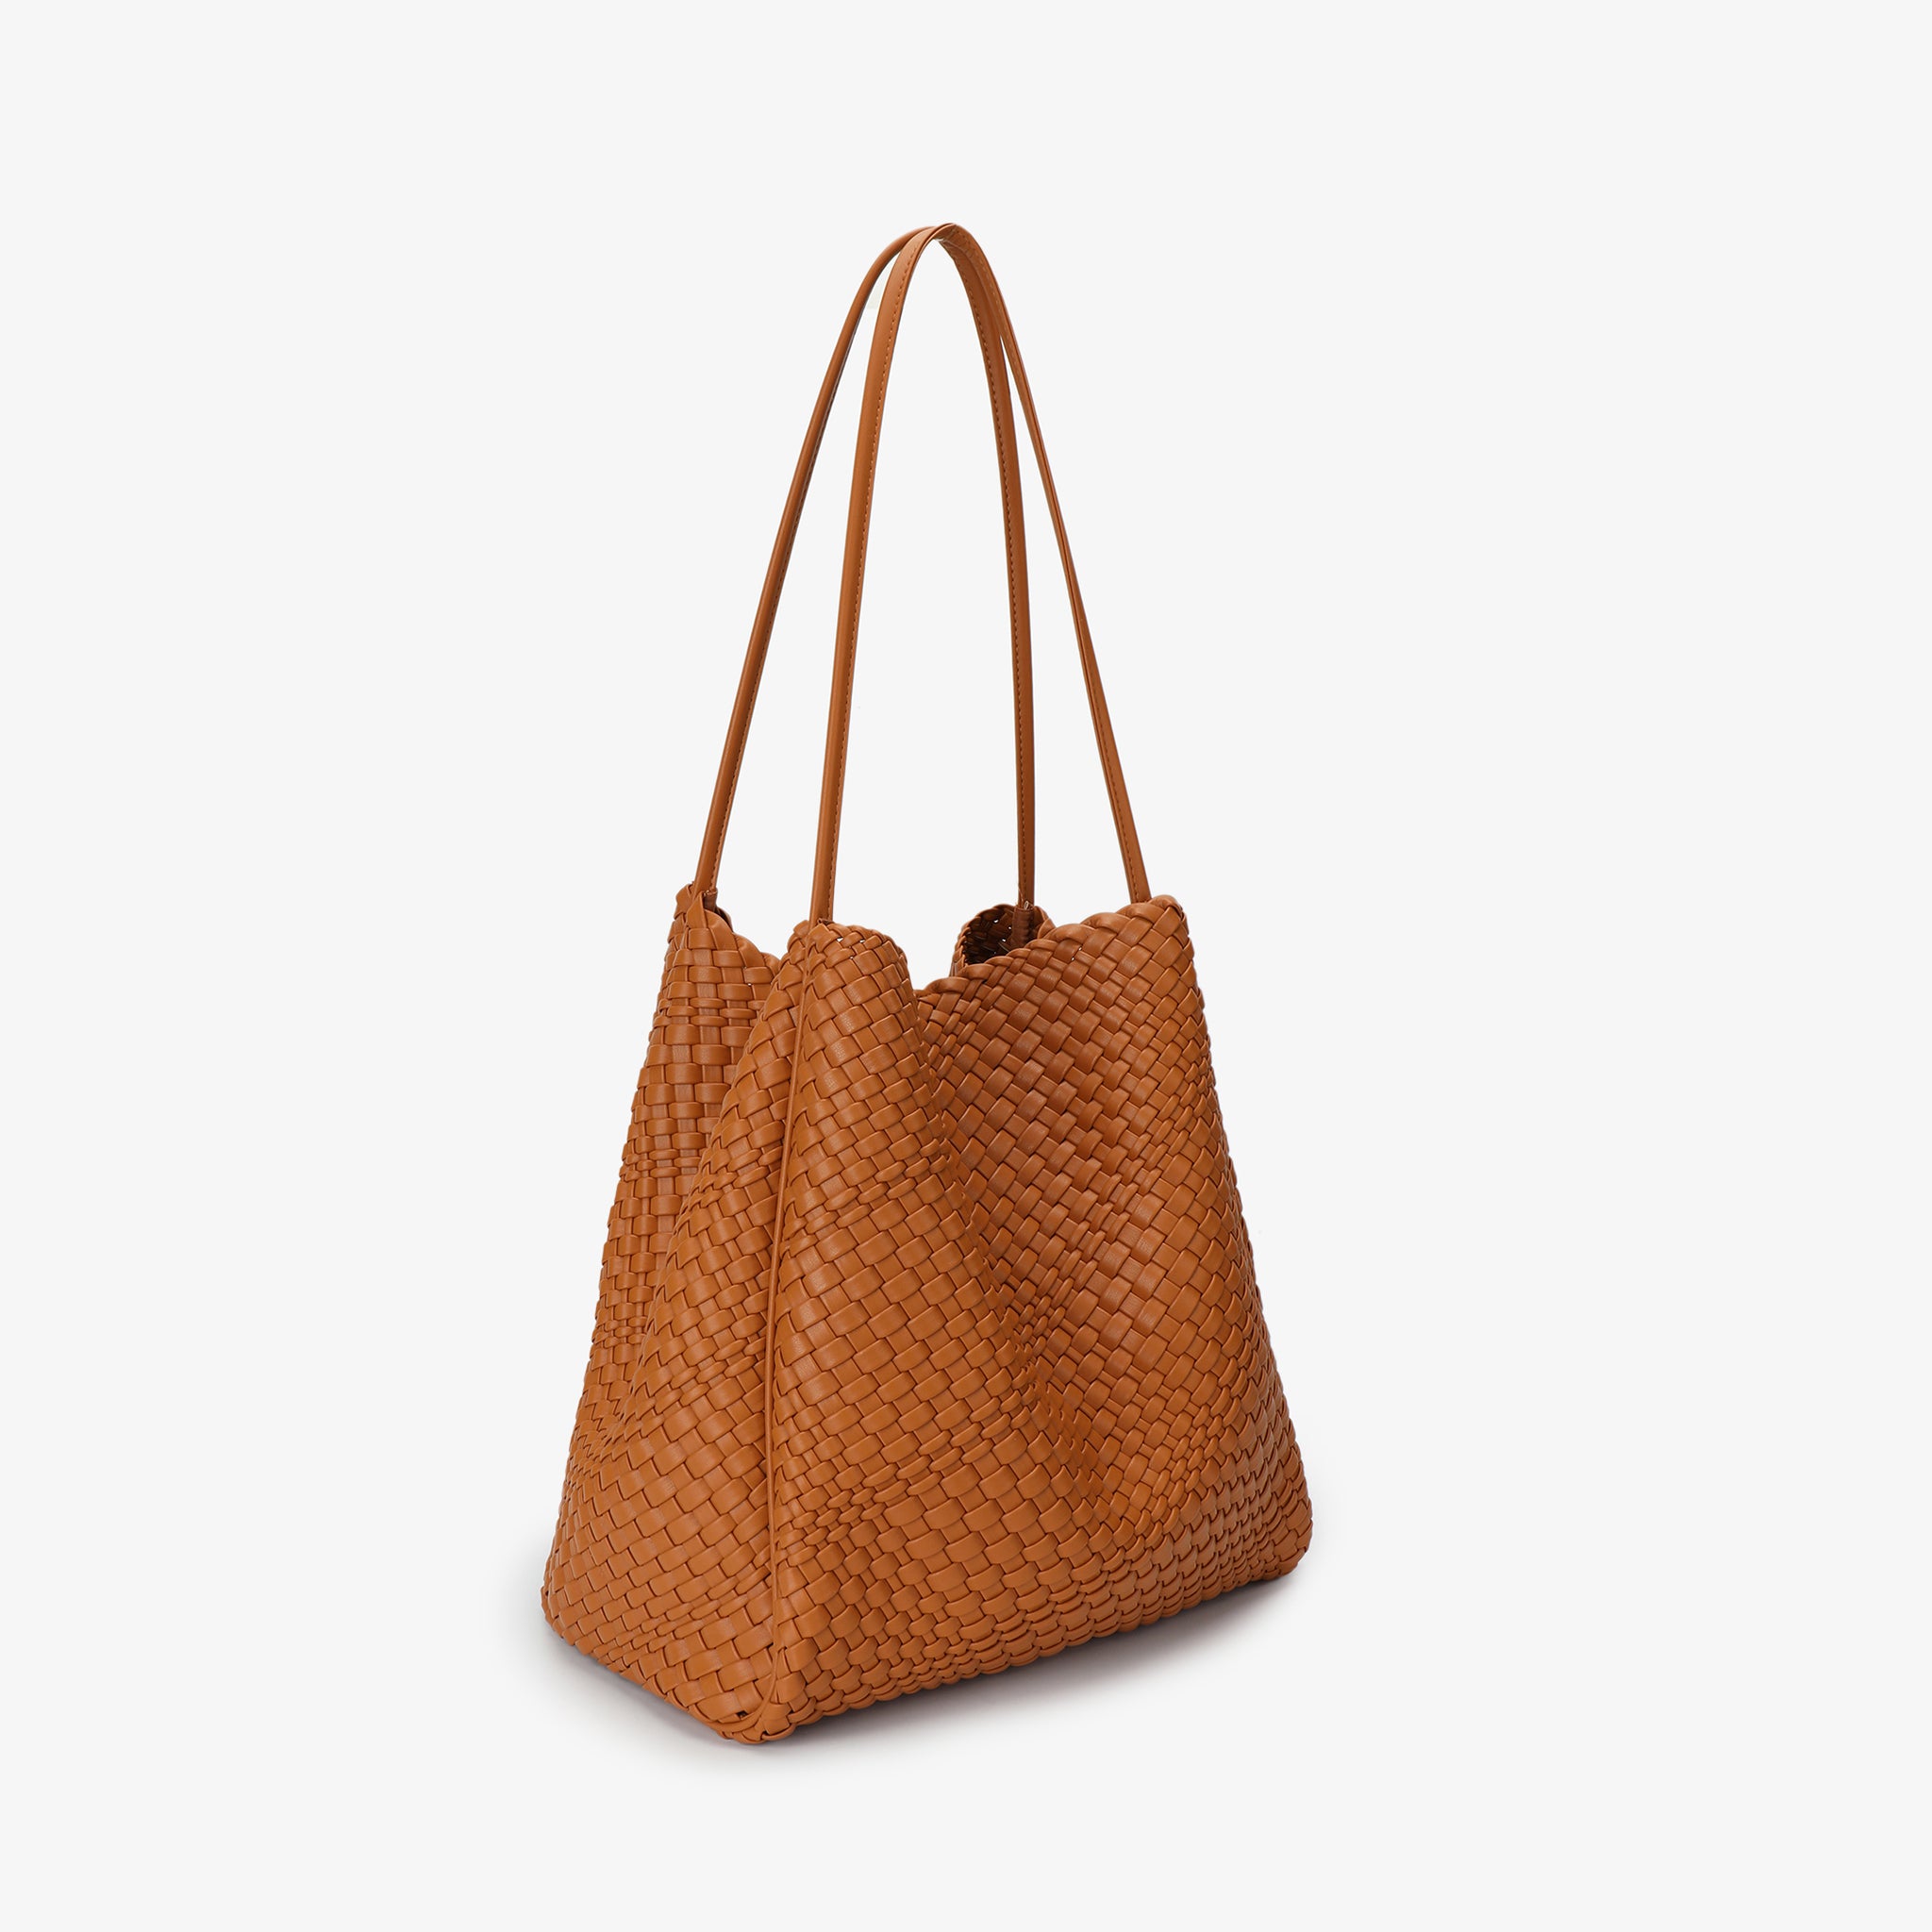 HOLLACE NORTH SOUTH TOTE WOVEN CAMEL